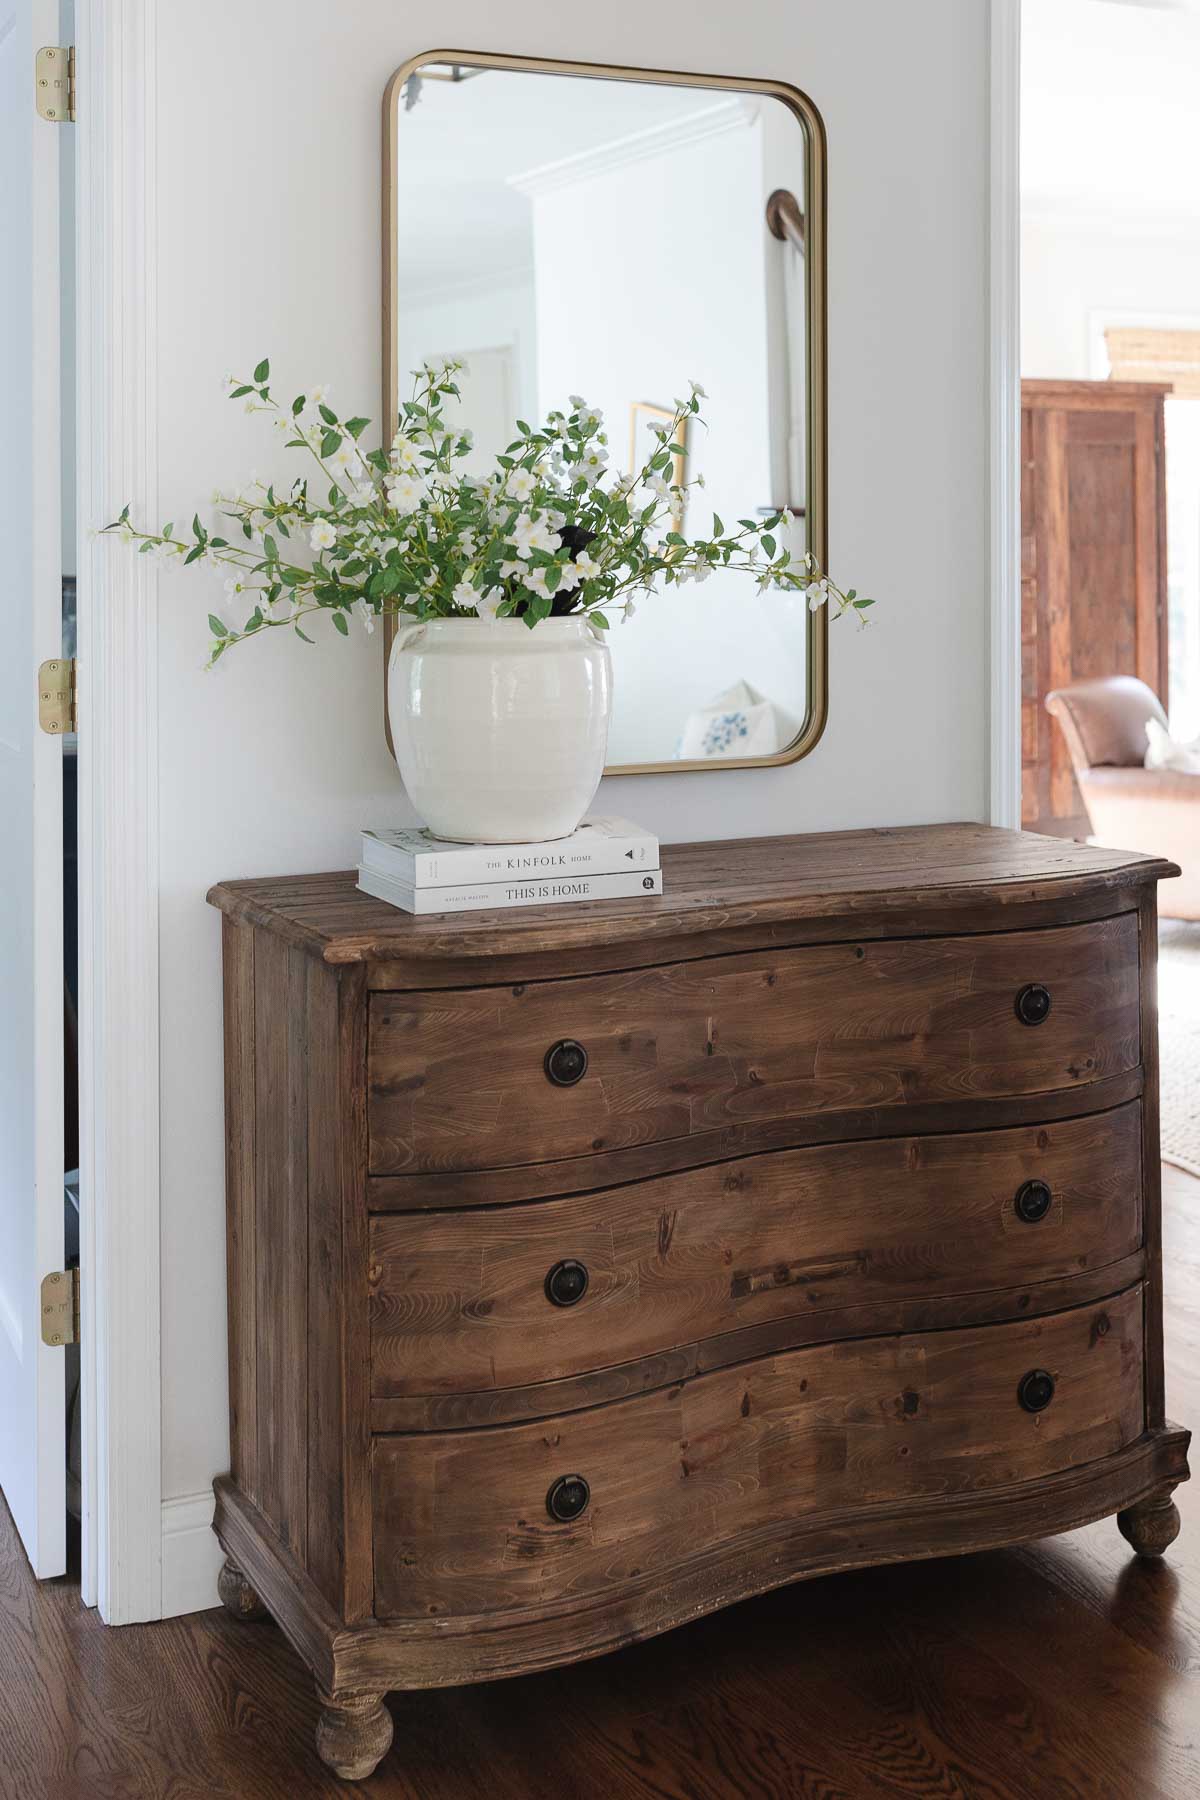 A wooden dresser with a mirror, making the small room look bigger.